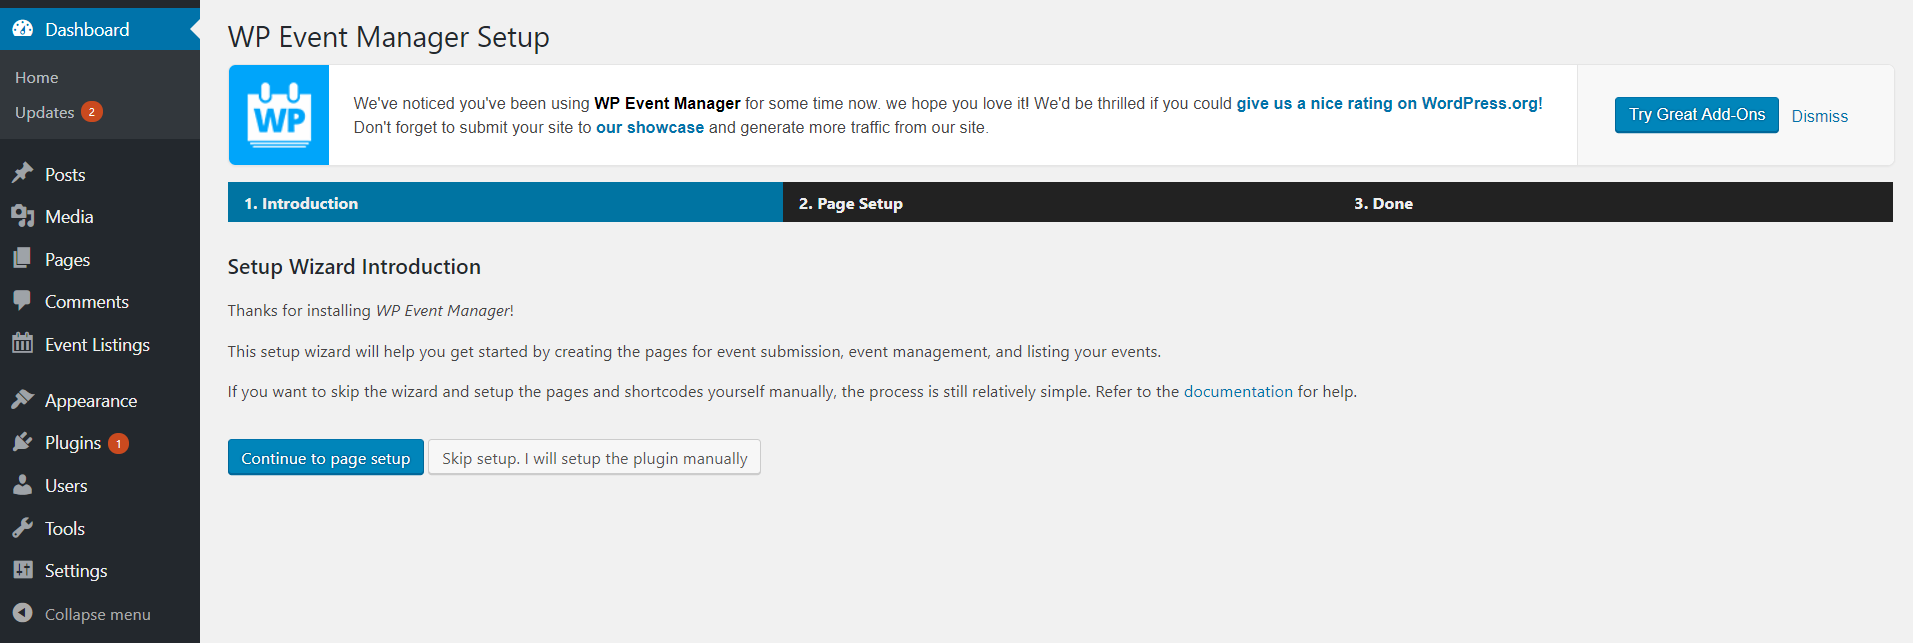 Events Management Plugin WP Event Manager 